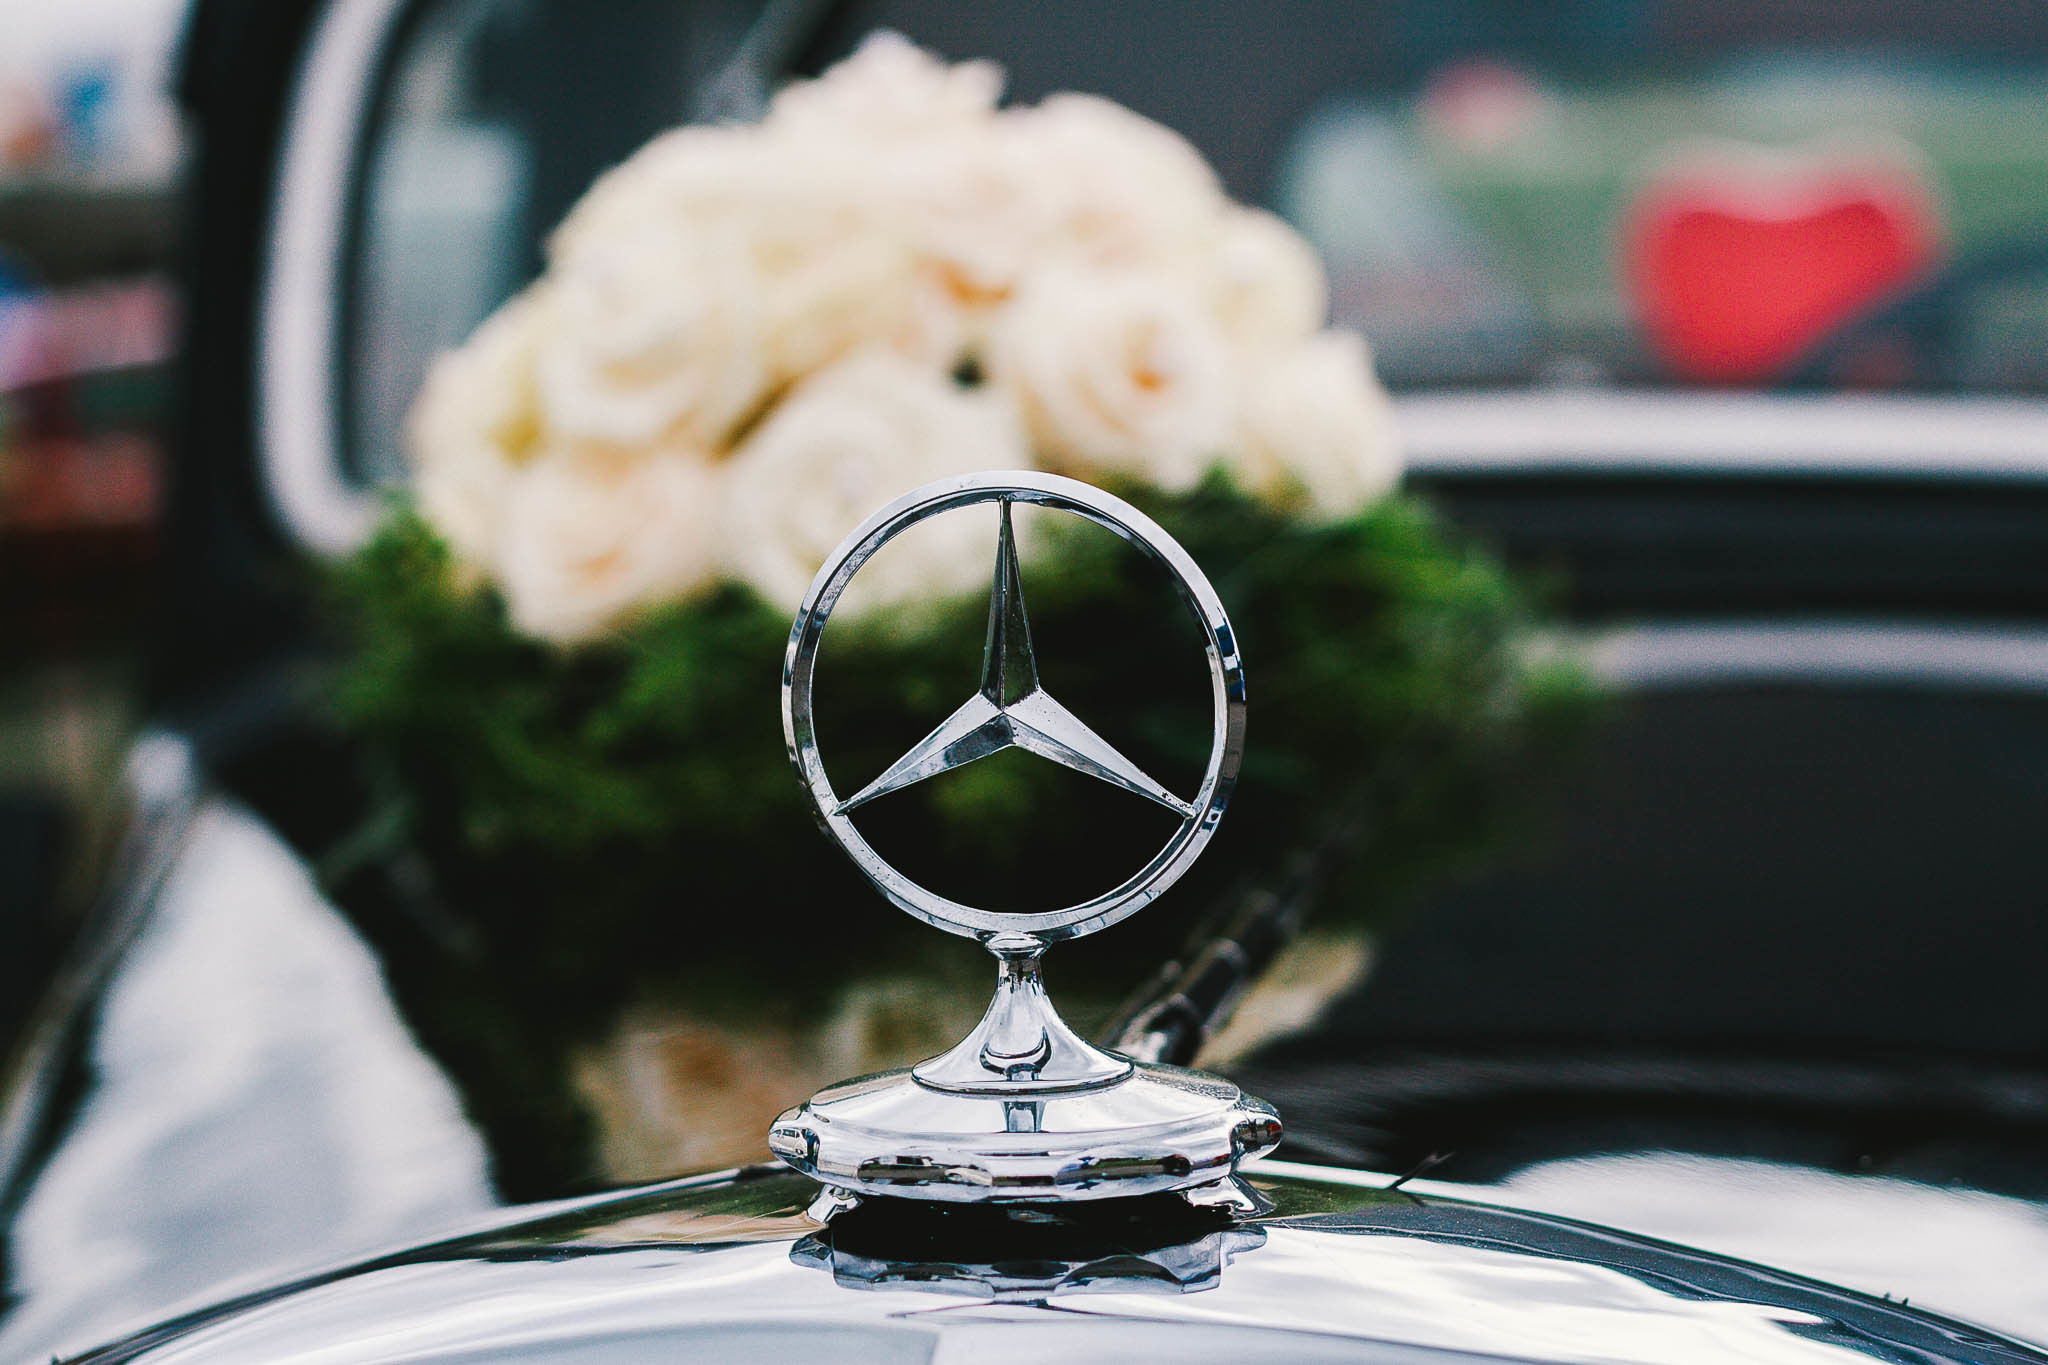 92881 download wallpaper mercedes, flowers, cars, bouquet, icon, badge screensavers and pictures for free